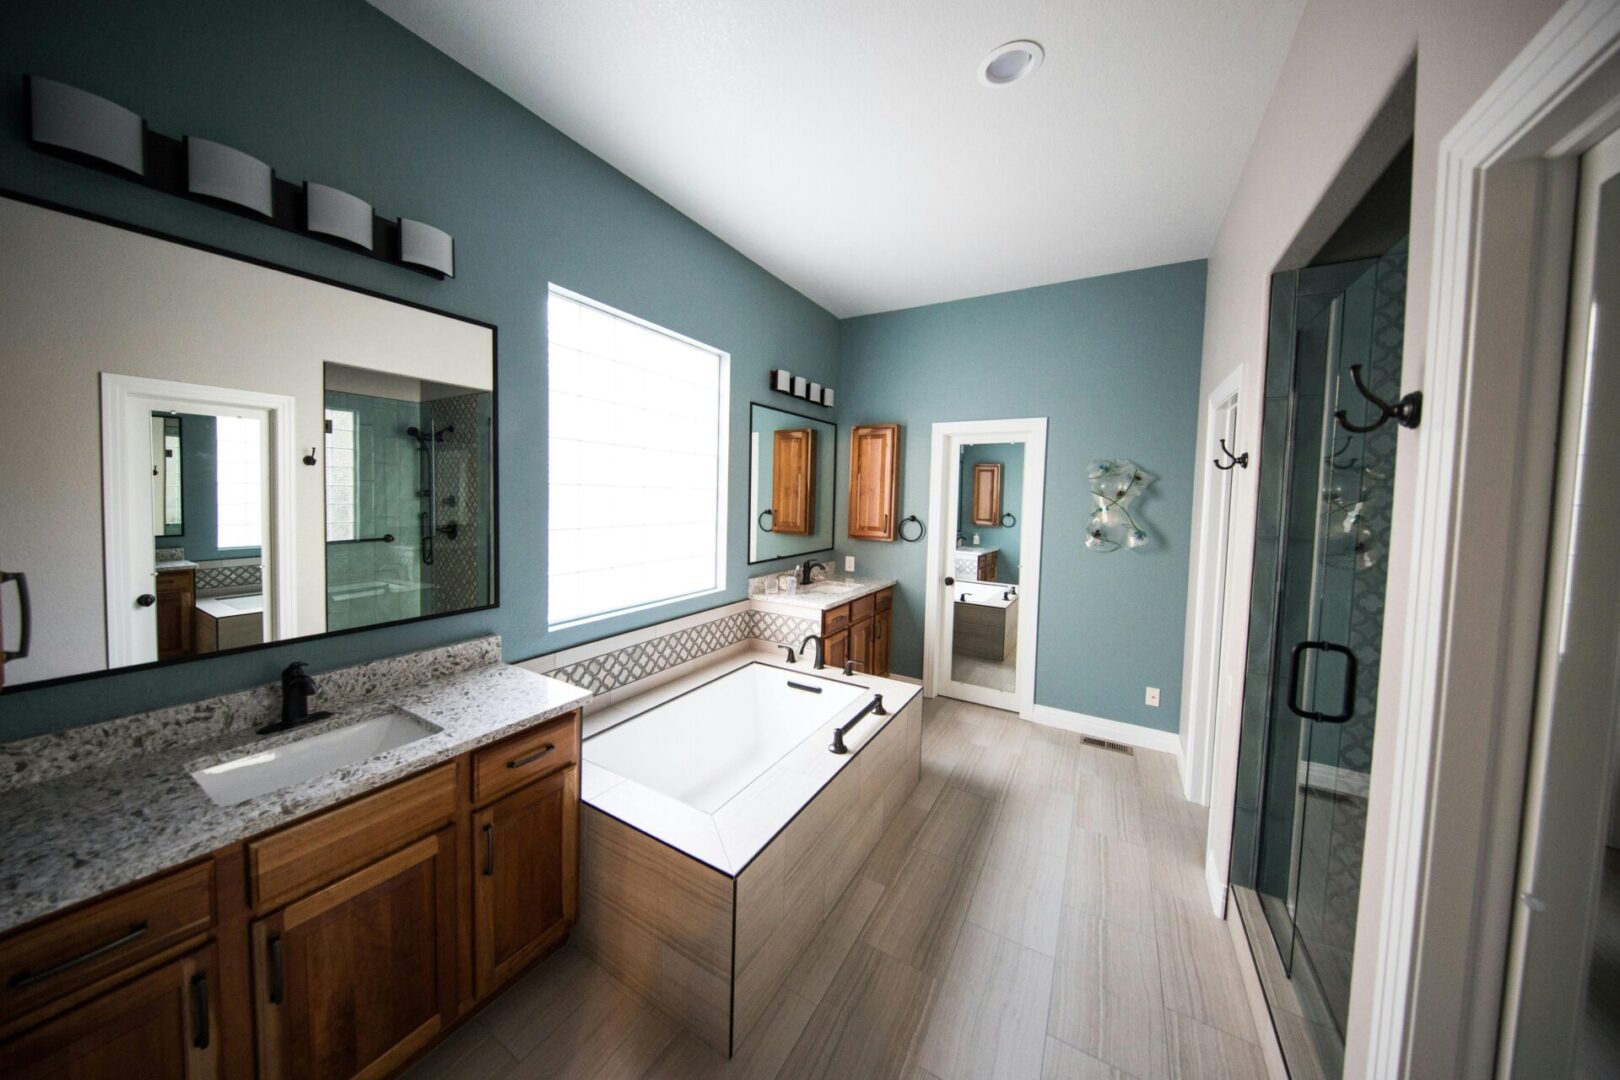 A bathroom with blue walls and wooden cabinets.